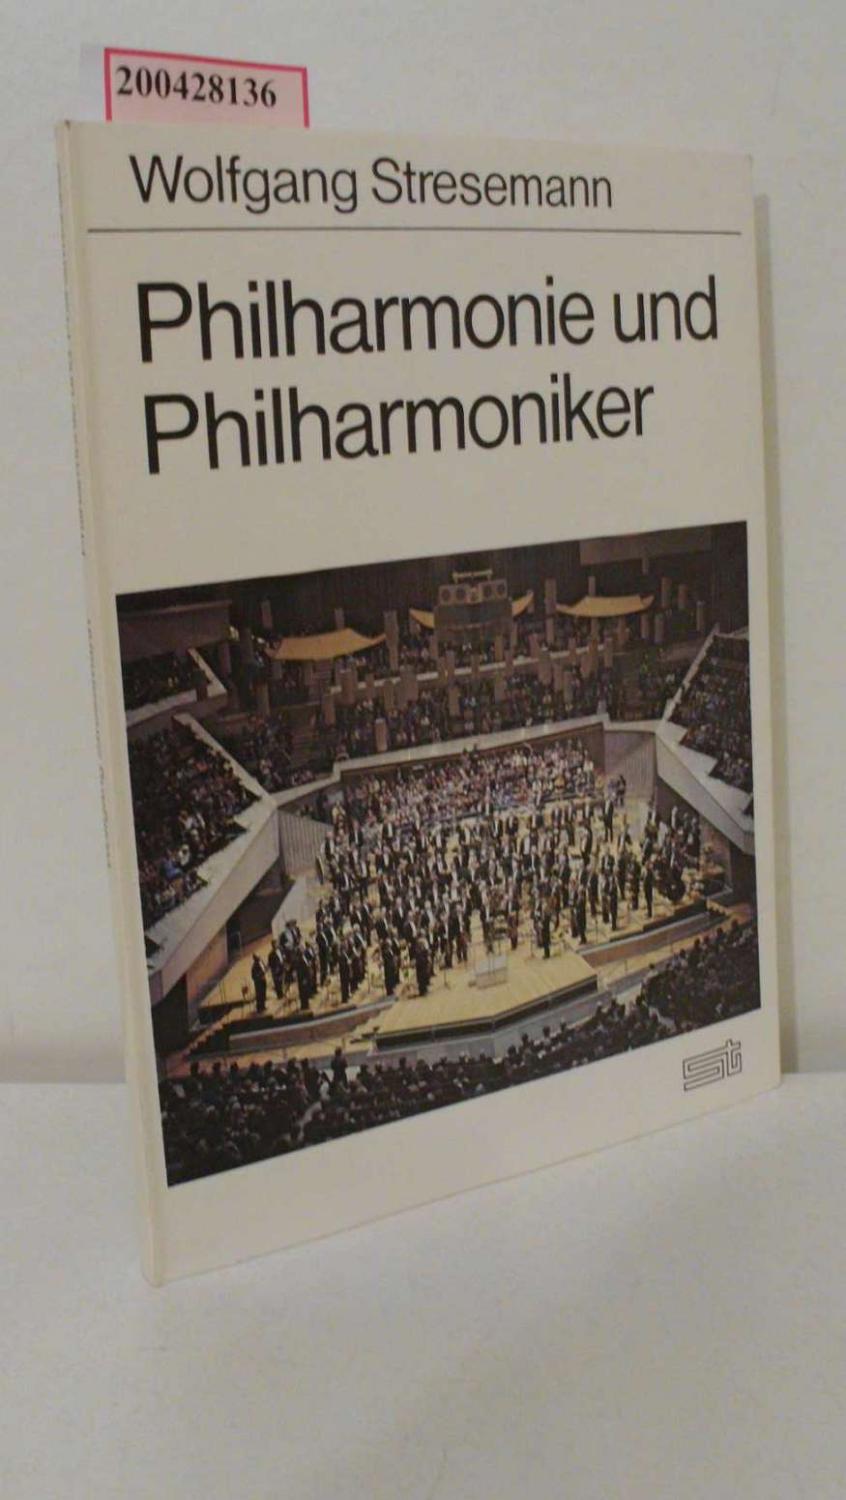 The Berlin Philharmonic from Bulow to Karajan: Home and History of a World Famous Orchestra